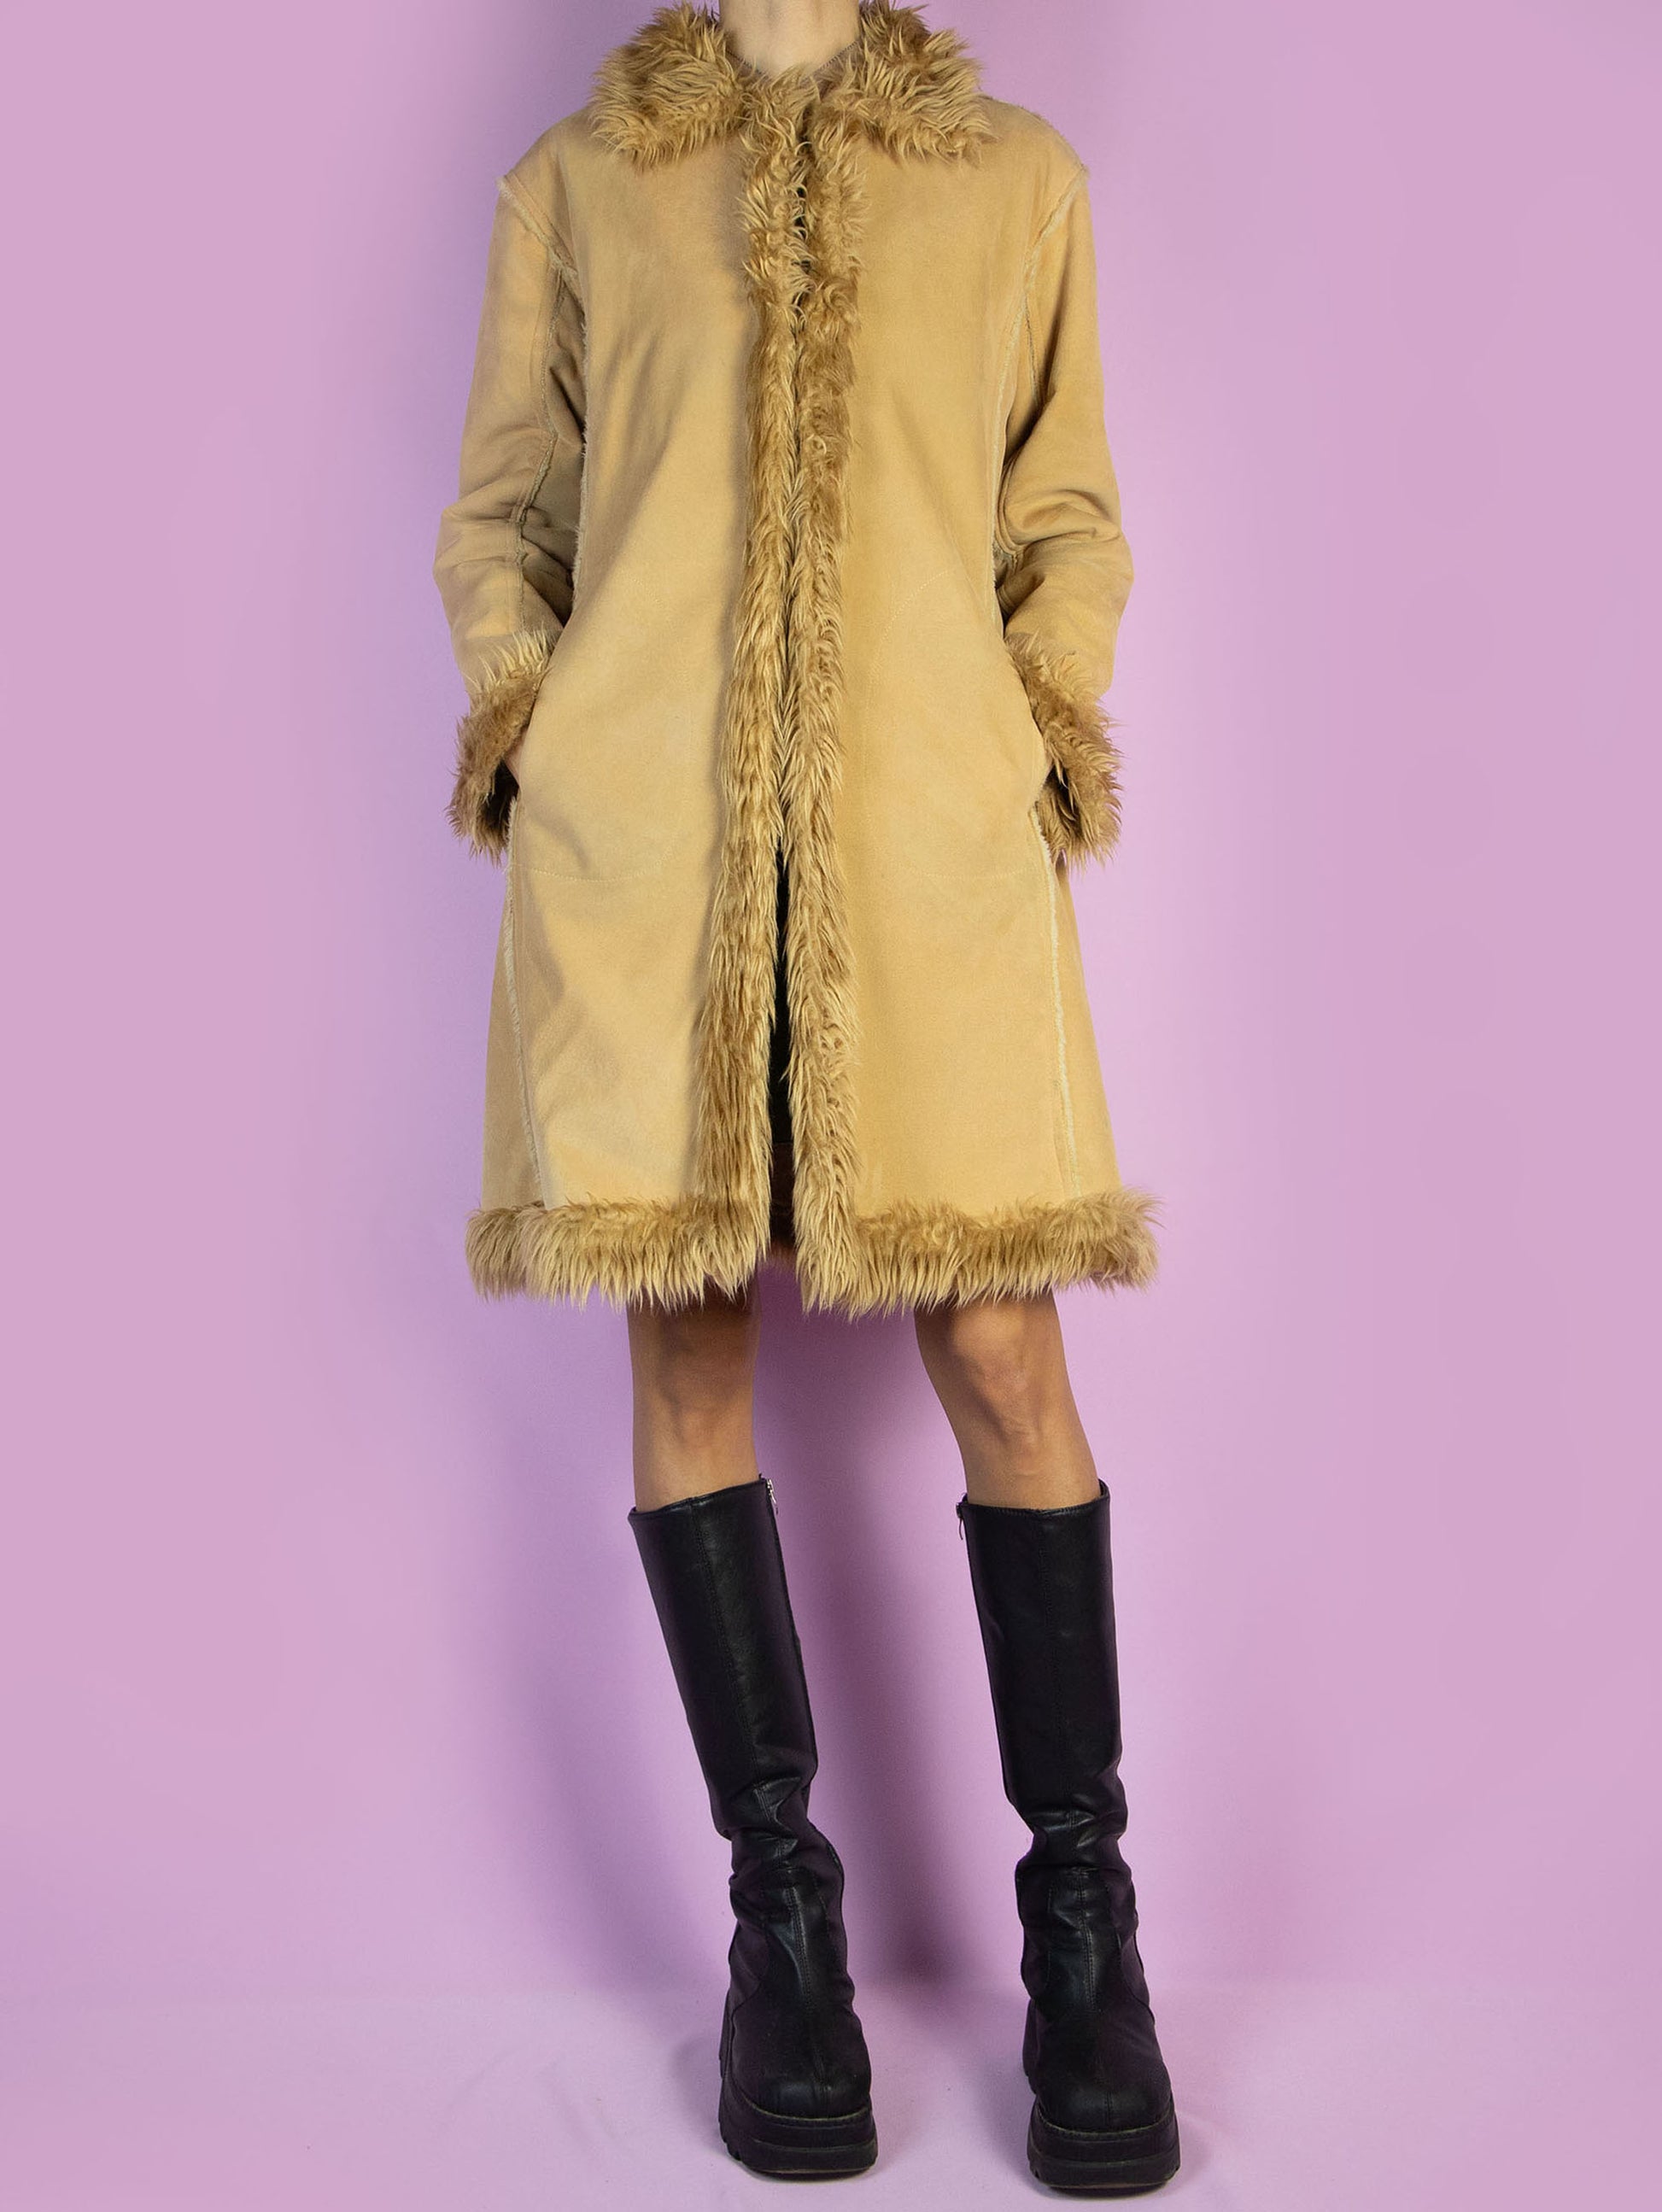 The Y2K Penny Lane Beige Coat is a vintage light brown beige faux suede coat with faux fur interior, collar, and cuffs. It also has pockets and a hook closure. Boho fairy grunge 2000s afghan-inspired winter statement jacket.